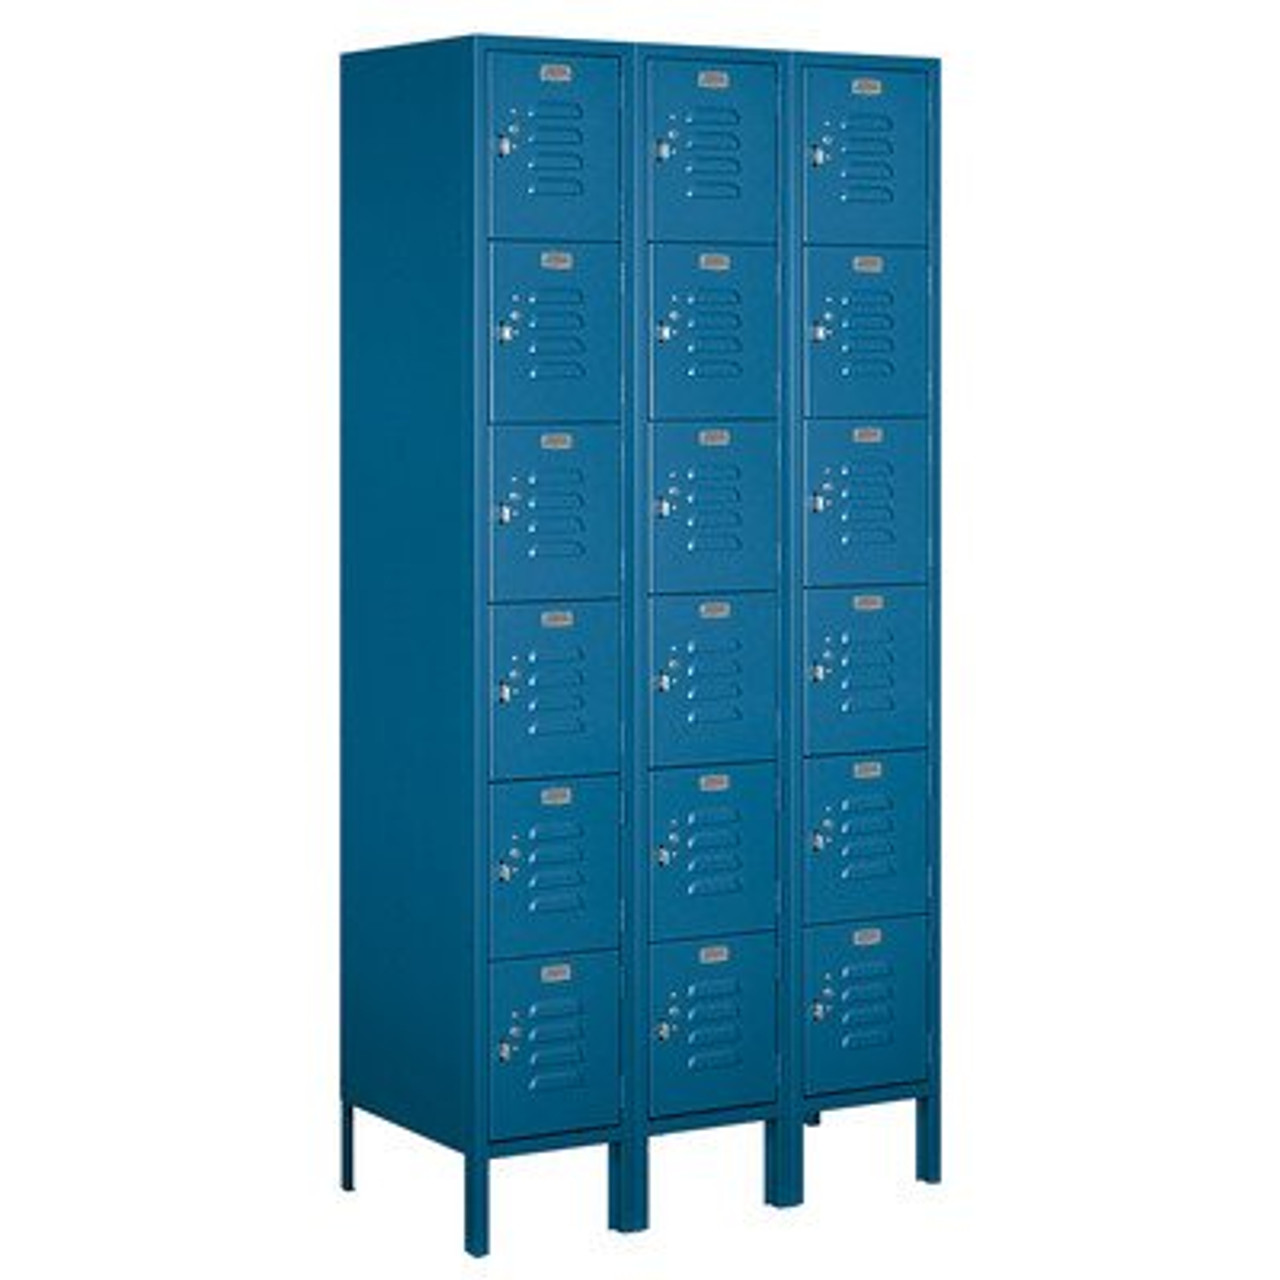 Blue Salsbury Industries Assembled 5-Tier Plastic Locker with Three Wide Storage Units 738.25-Inch High by 18-Inch Deep 